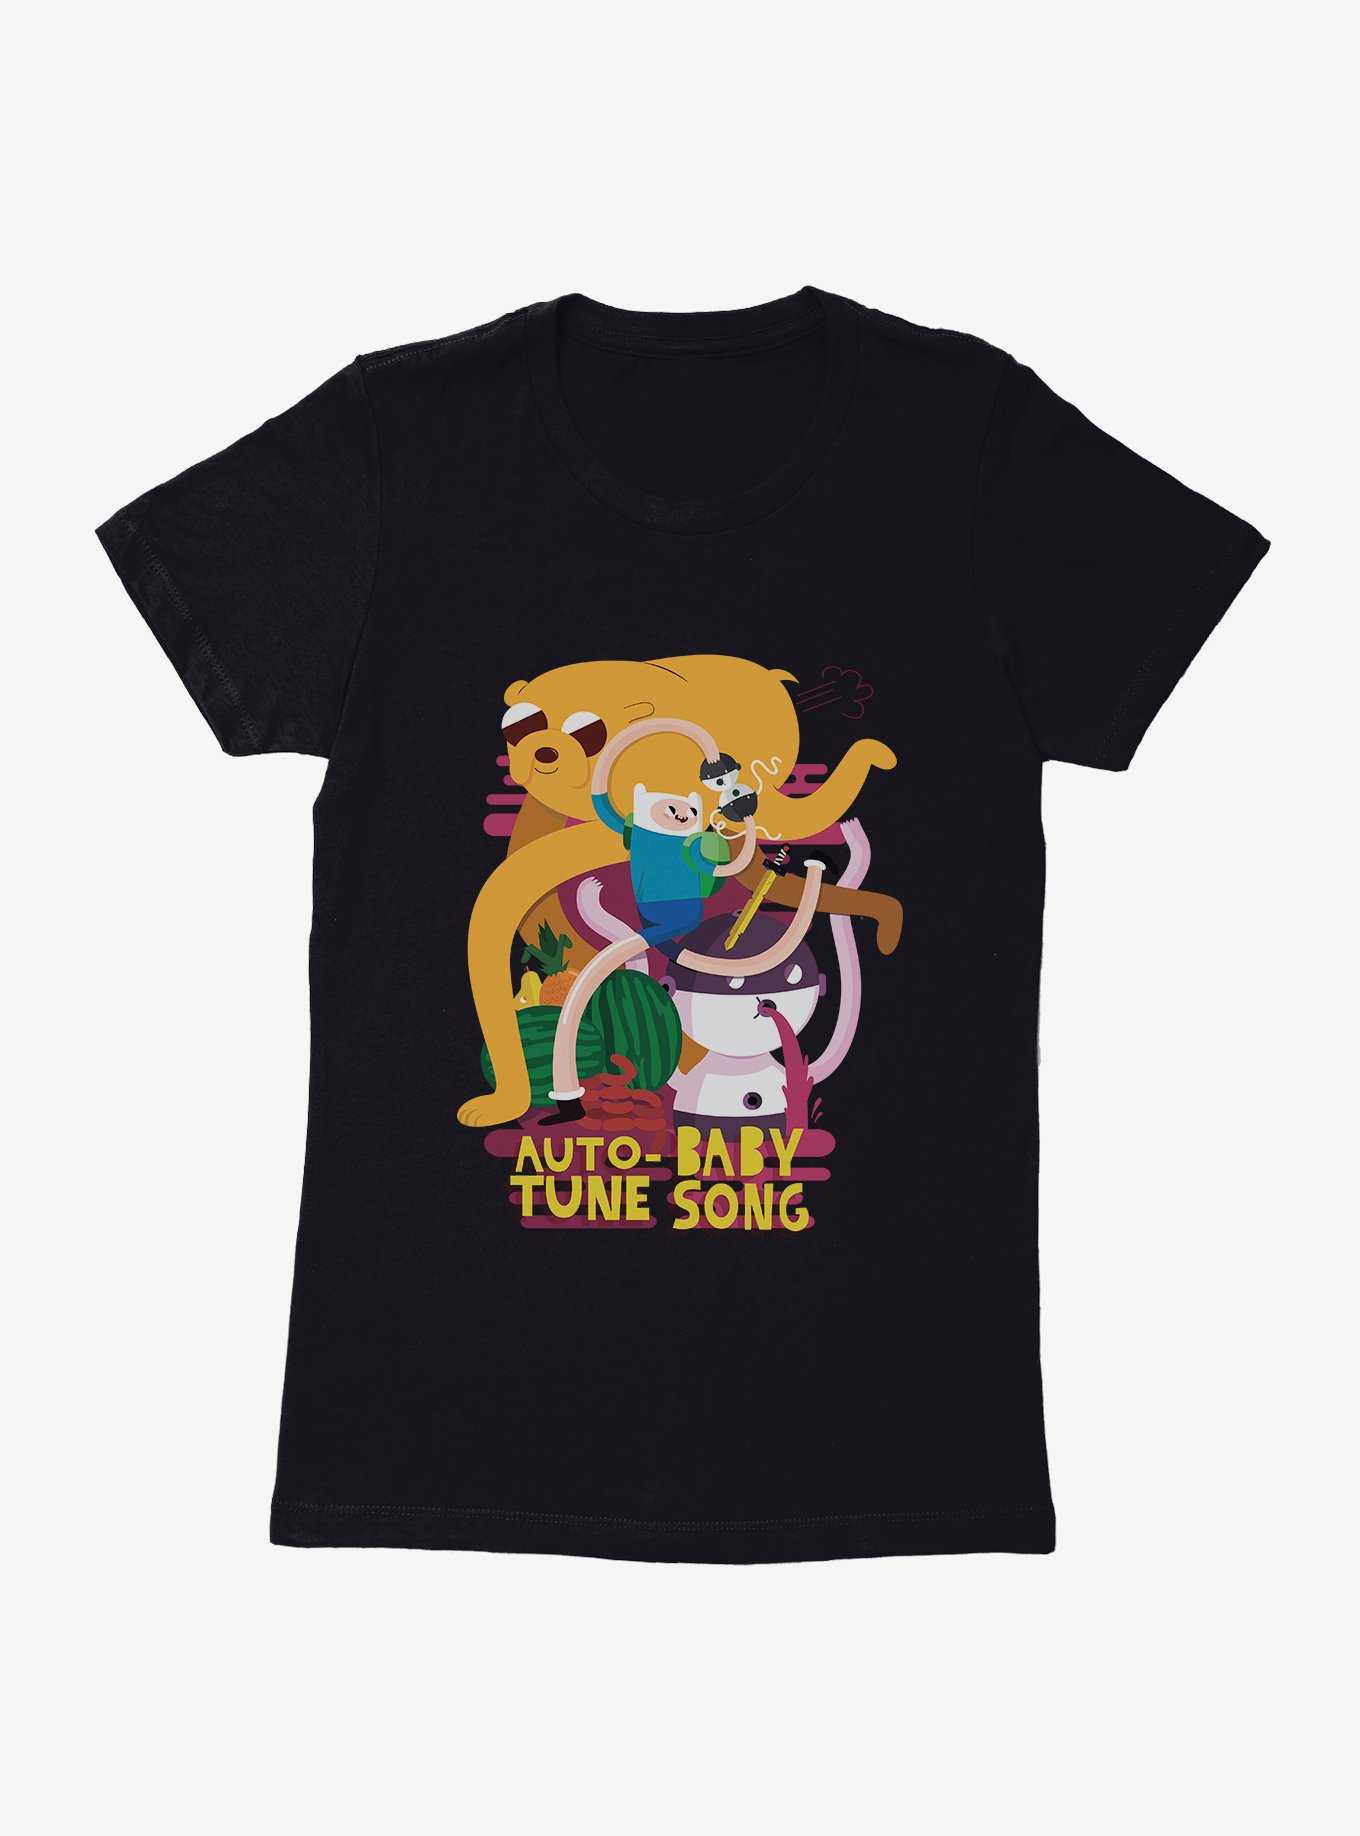 Adventure Time Auto-Tune Baby Song Womens T-Shirt, , hi-res